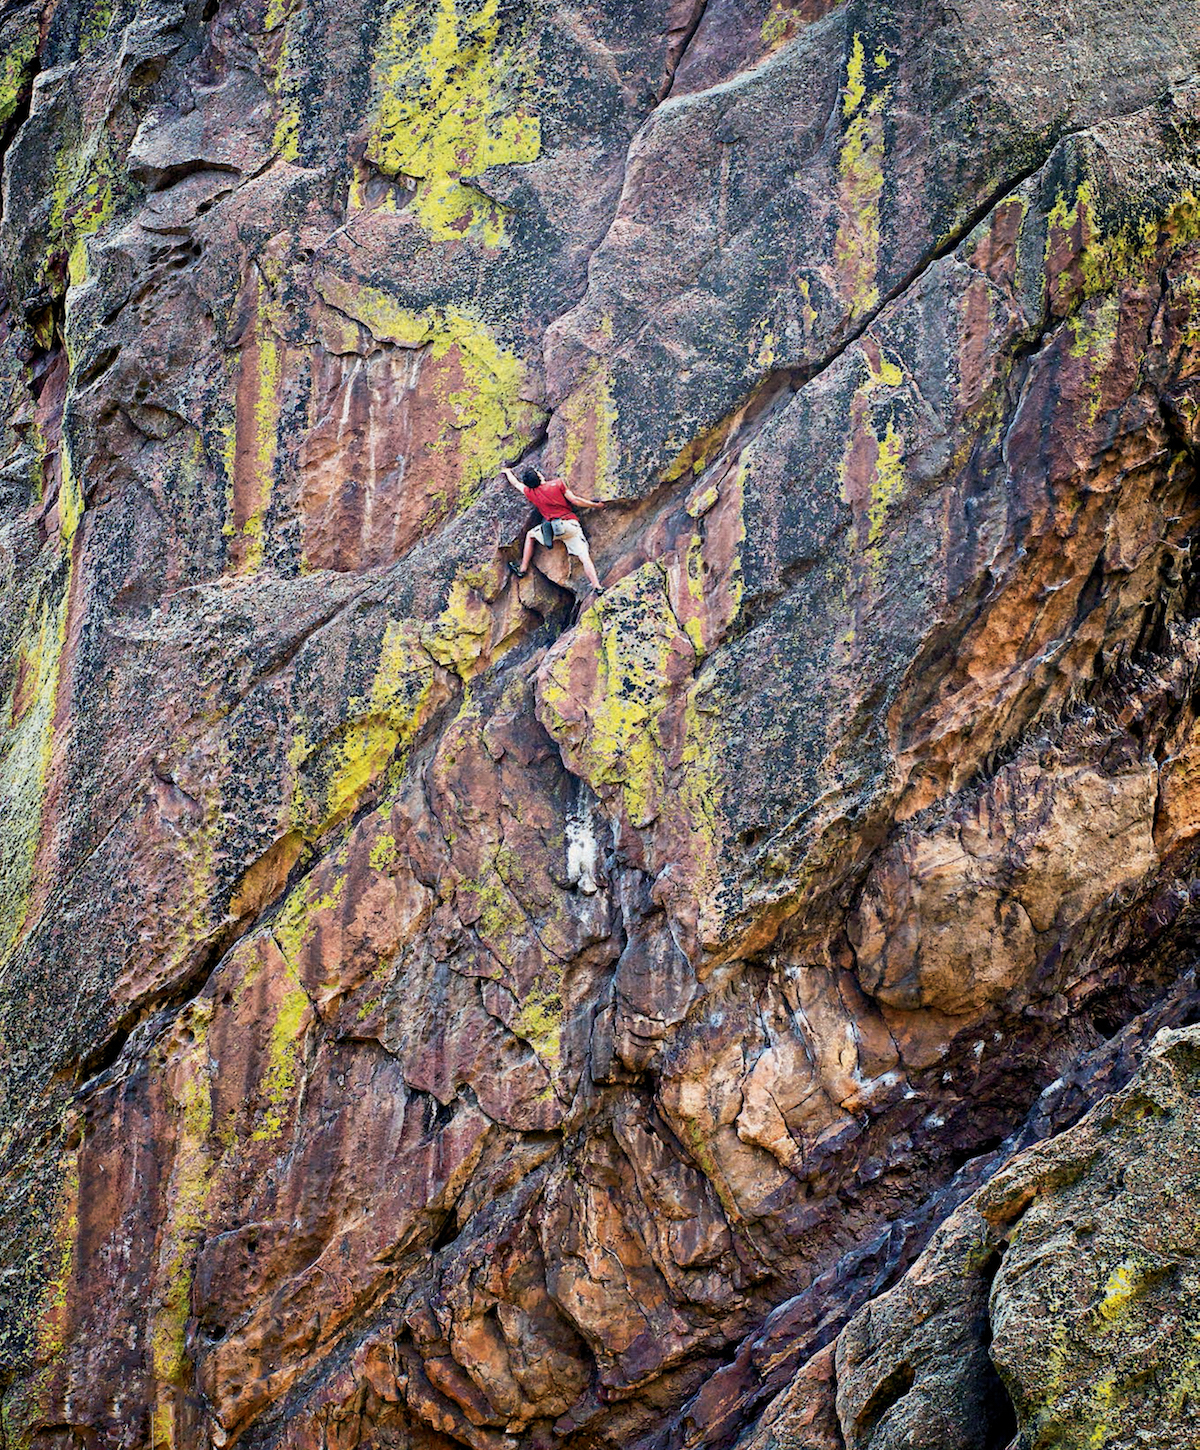 Honnold on Outer Space (5.10c), Eldorado Canyon, Colorado. Philosopher Jack Turner argues, Solo climbing is unique, a direct confrontation with the self. That purity of attention begins to be diluted as soon as you start worrying about other things. By the time you're worrying about whether your logo is being seen, it's a totally different experience.... The spirit of climbing is untranslatable into mass media. [Photo] Celin Serbo